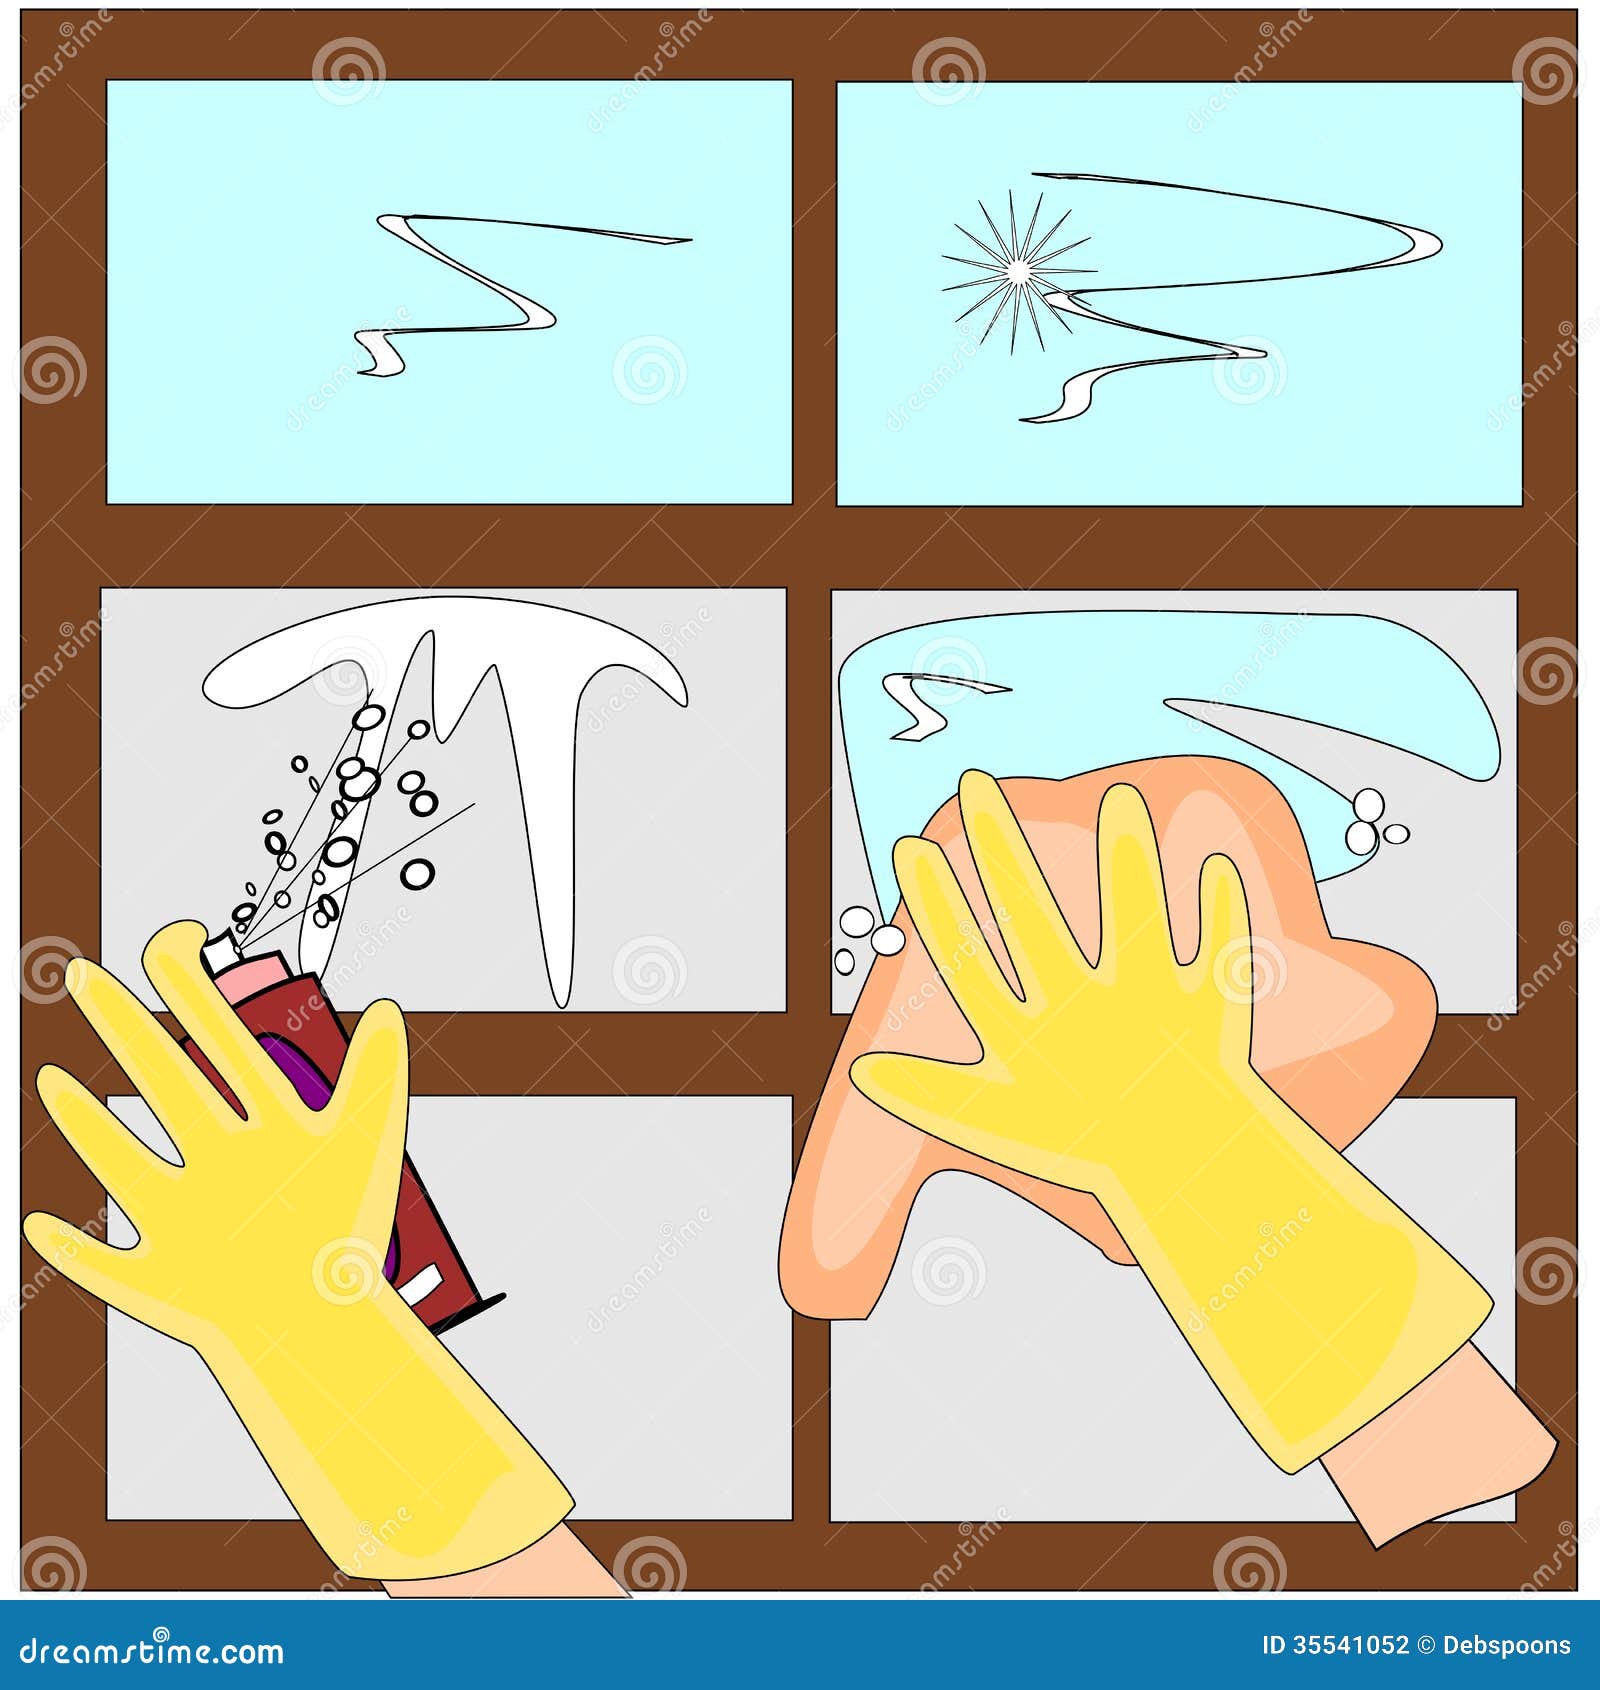 clipart window cleaning - photo #41